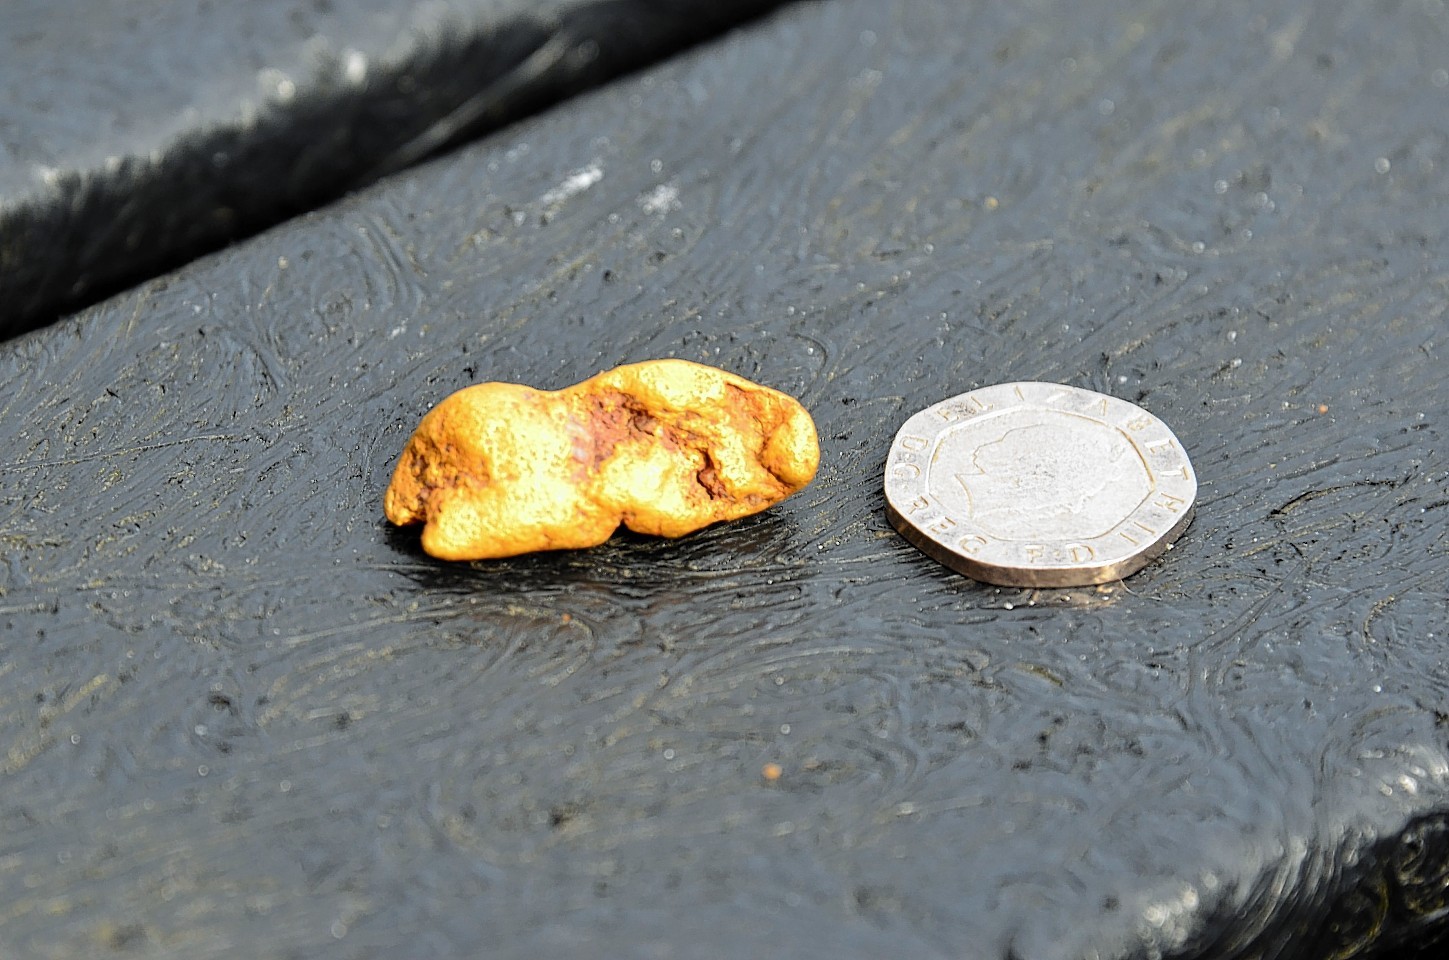 The 18.13 gsm gold nugget found in waters at Wanlockhead, Dumfries and Galloway